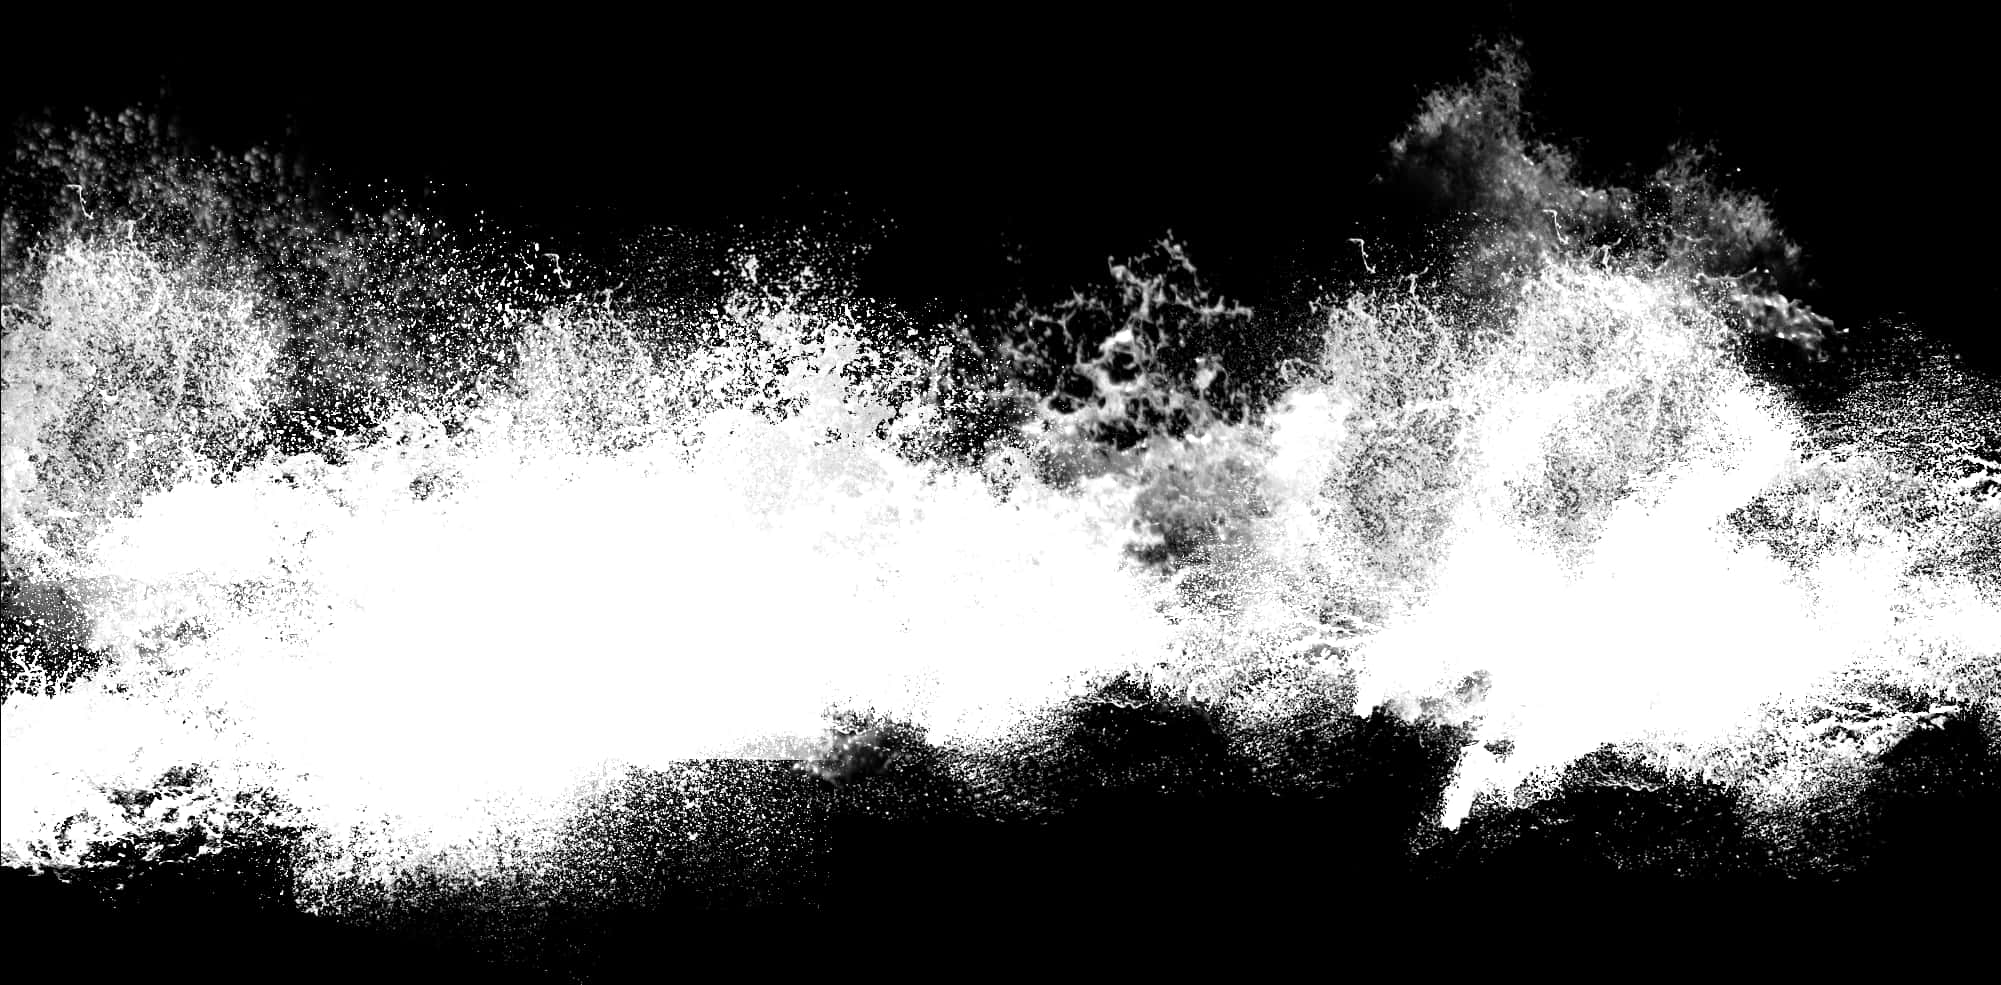 Abstract Snow Explosion